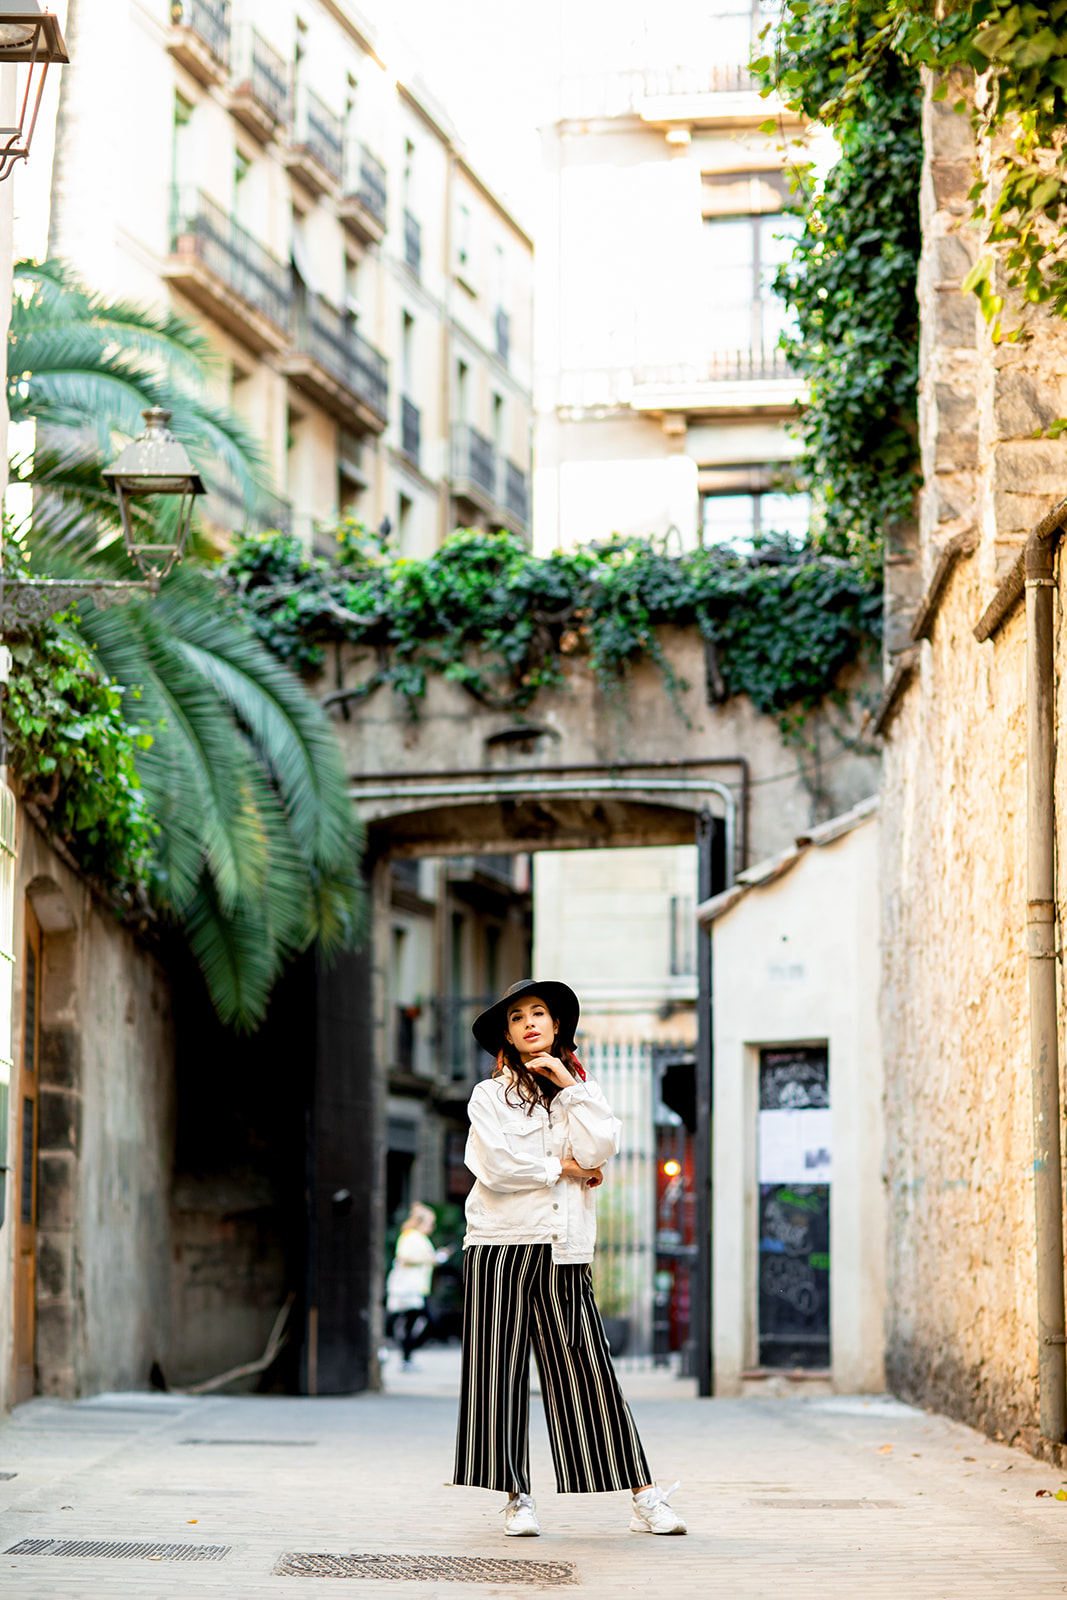 Barcelona Portrait Session in the Gothic Quarter - Image Property of www.j-dphoto.com